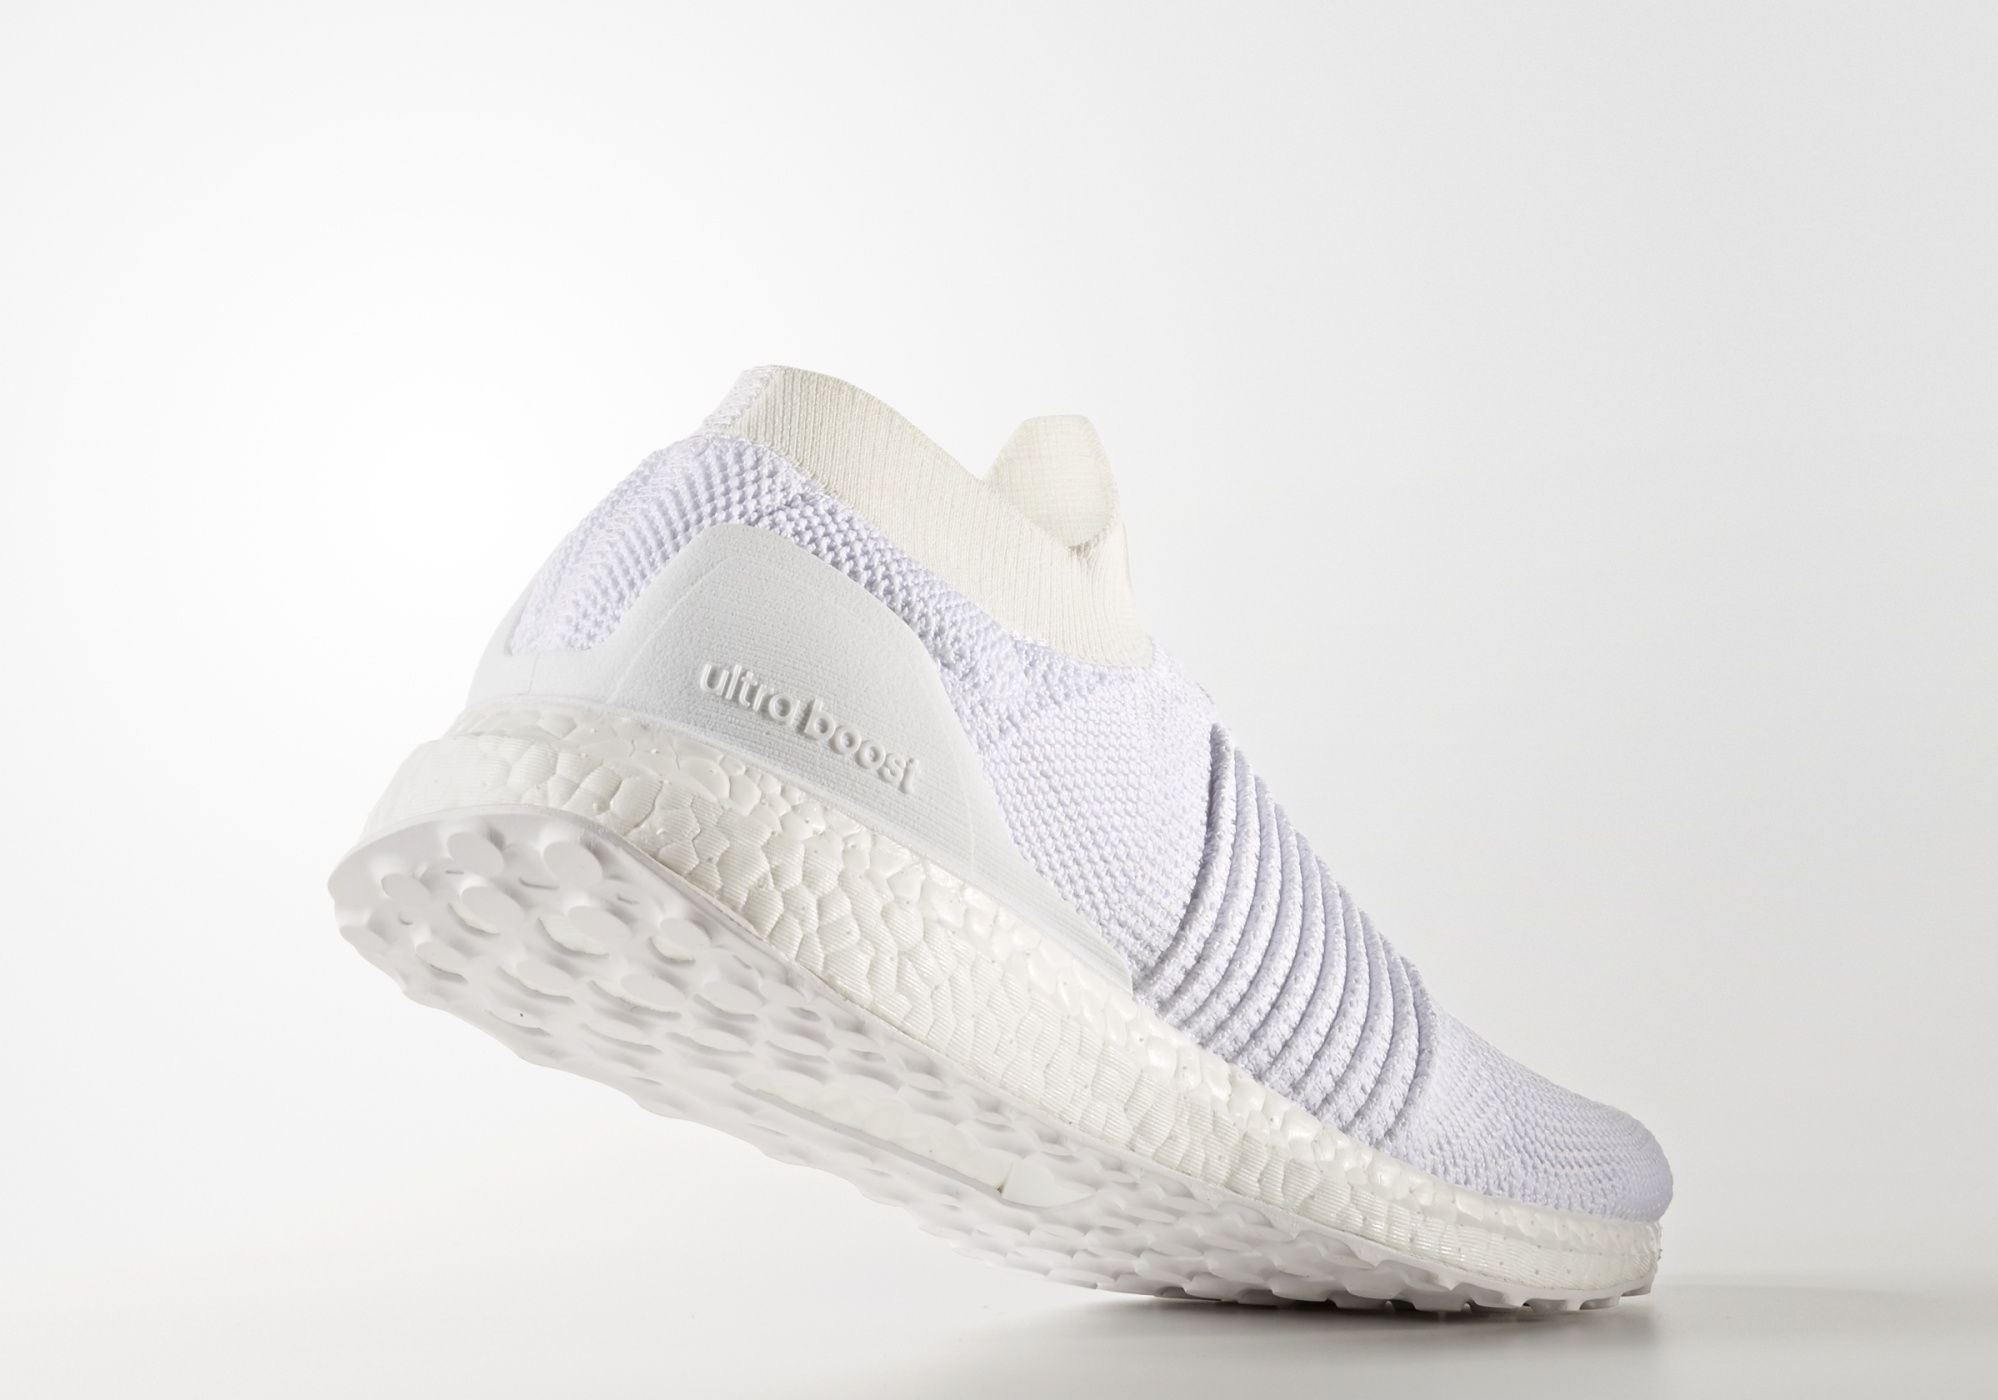 all white laceless ultra boost